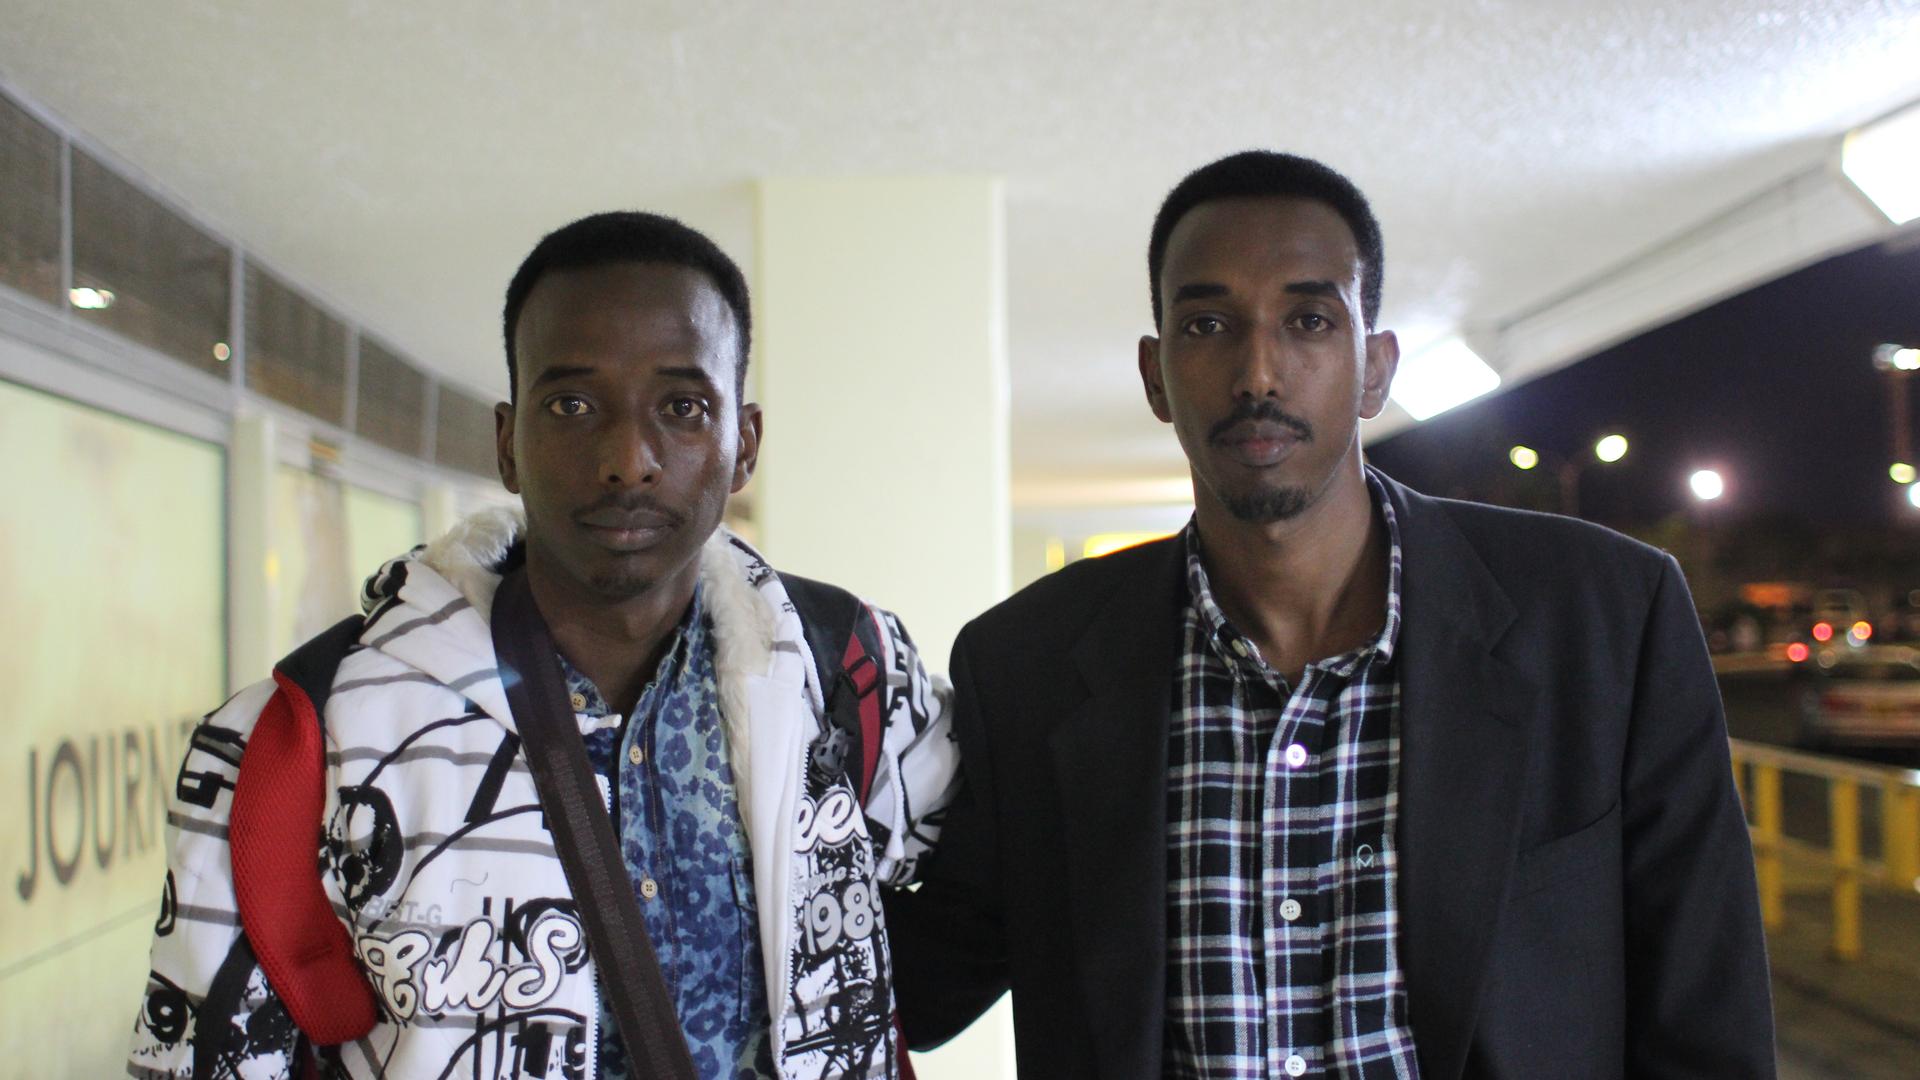 Abdi and Hassan bid farewell to each other at Nairobi Airport in August 2014. A few minutes later, Abdi boarded a flight to Boston. The brothers have not seen each other since. Hassan is still attempting to apply for refugee status in the US.